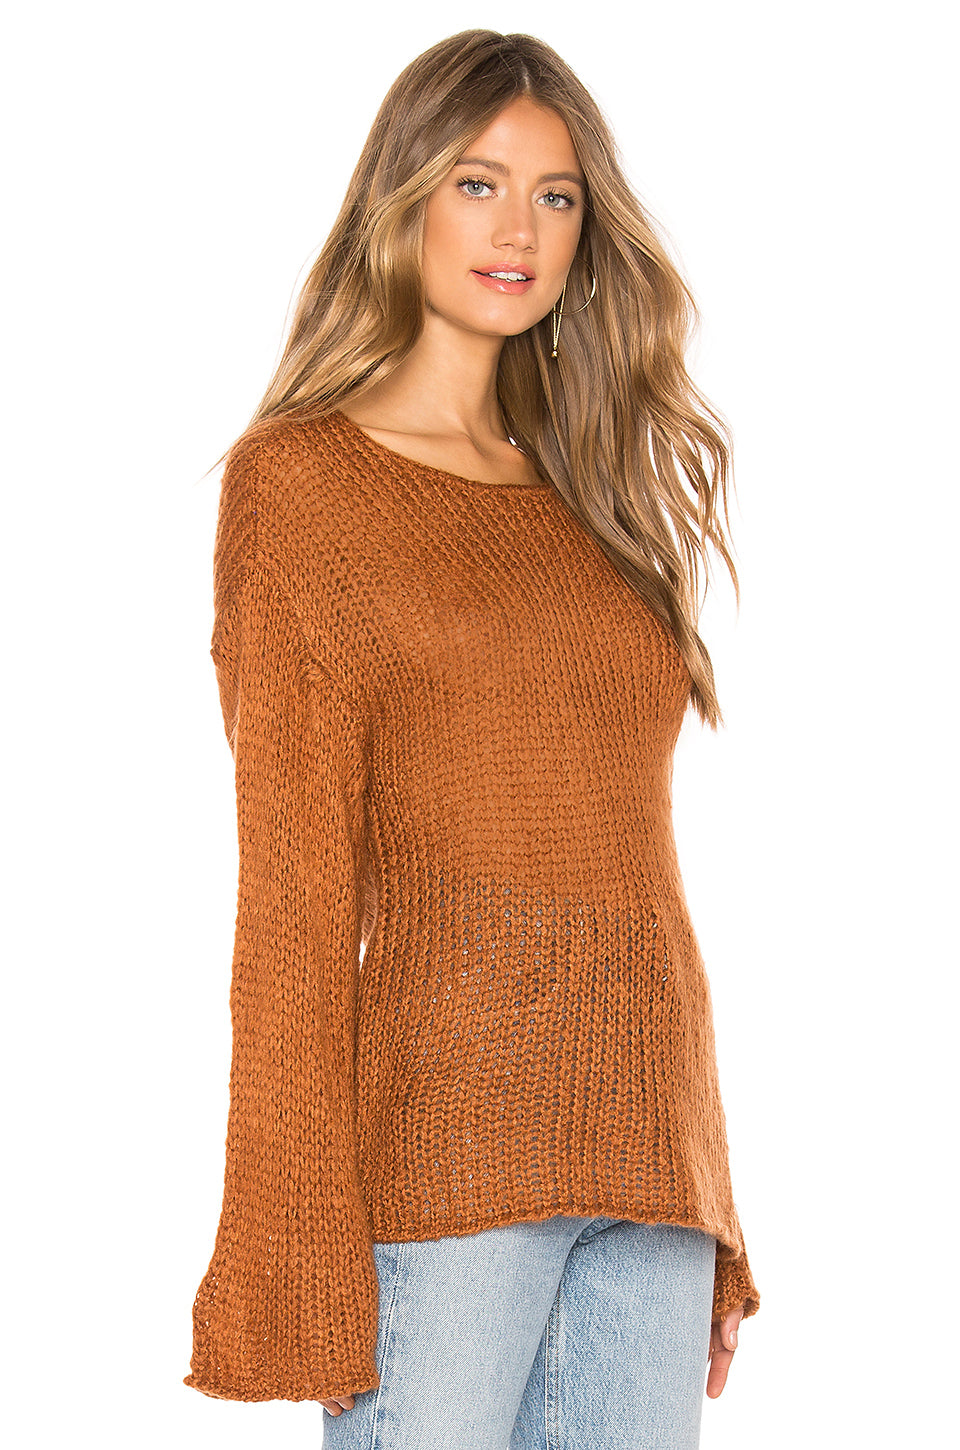 Mags Sweater in RUST